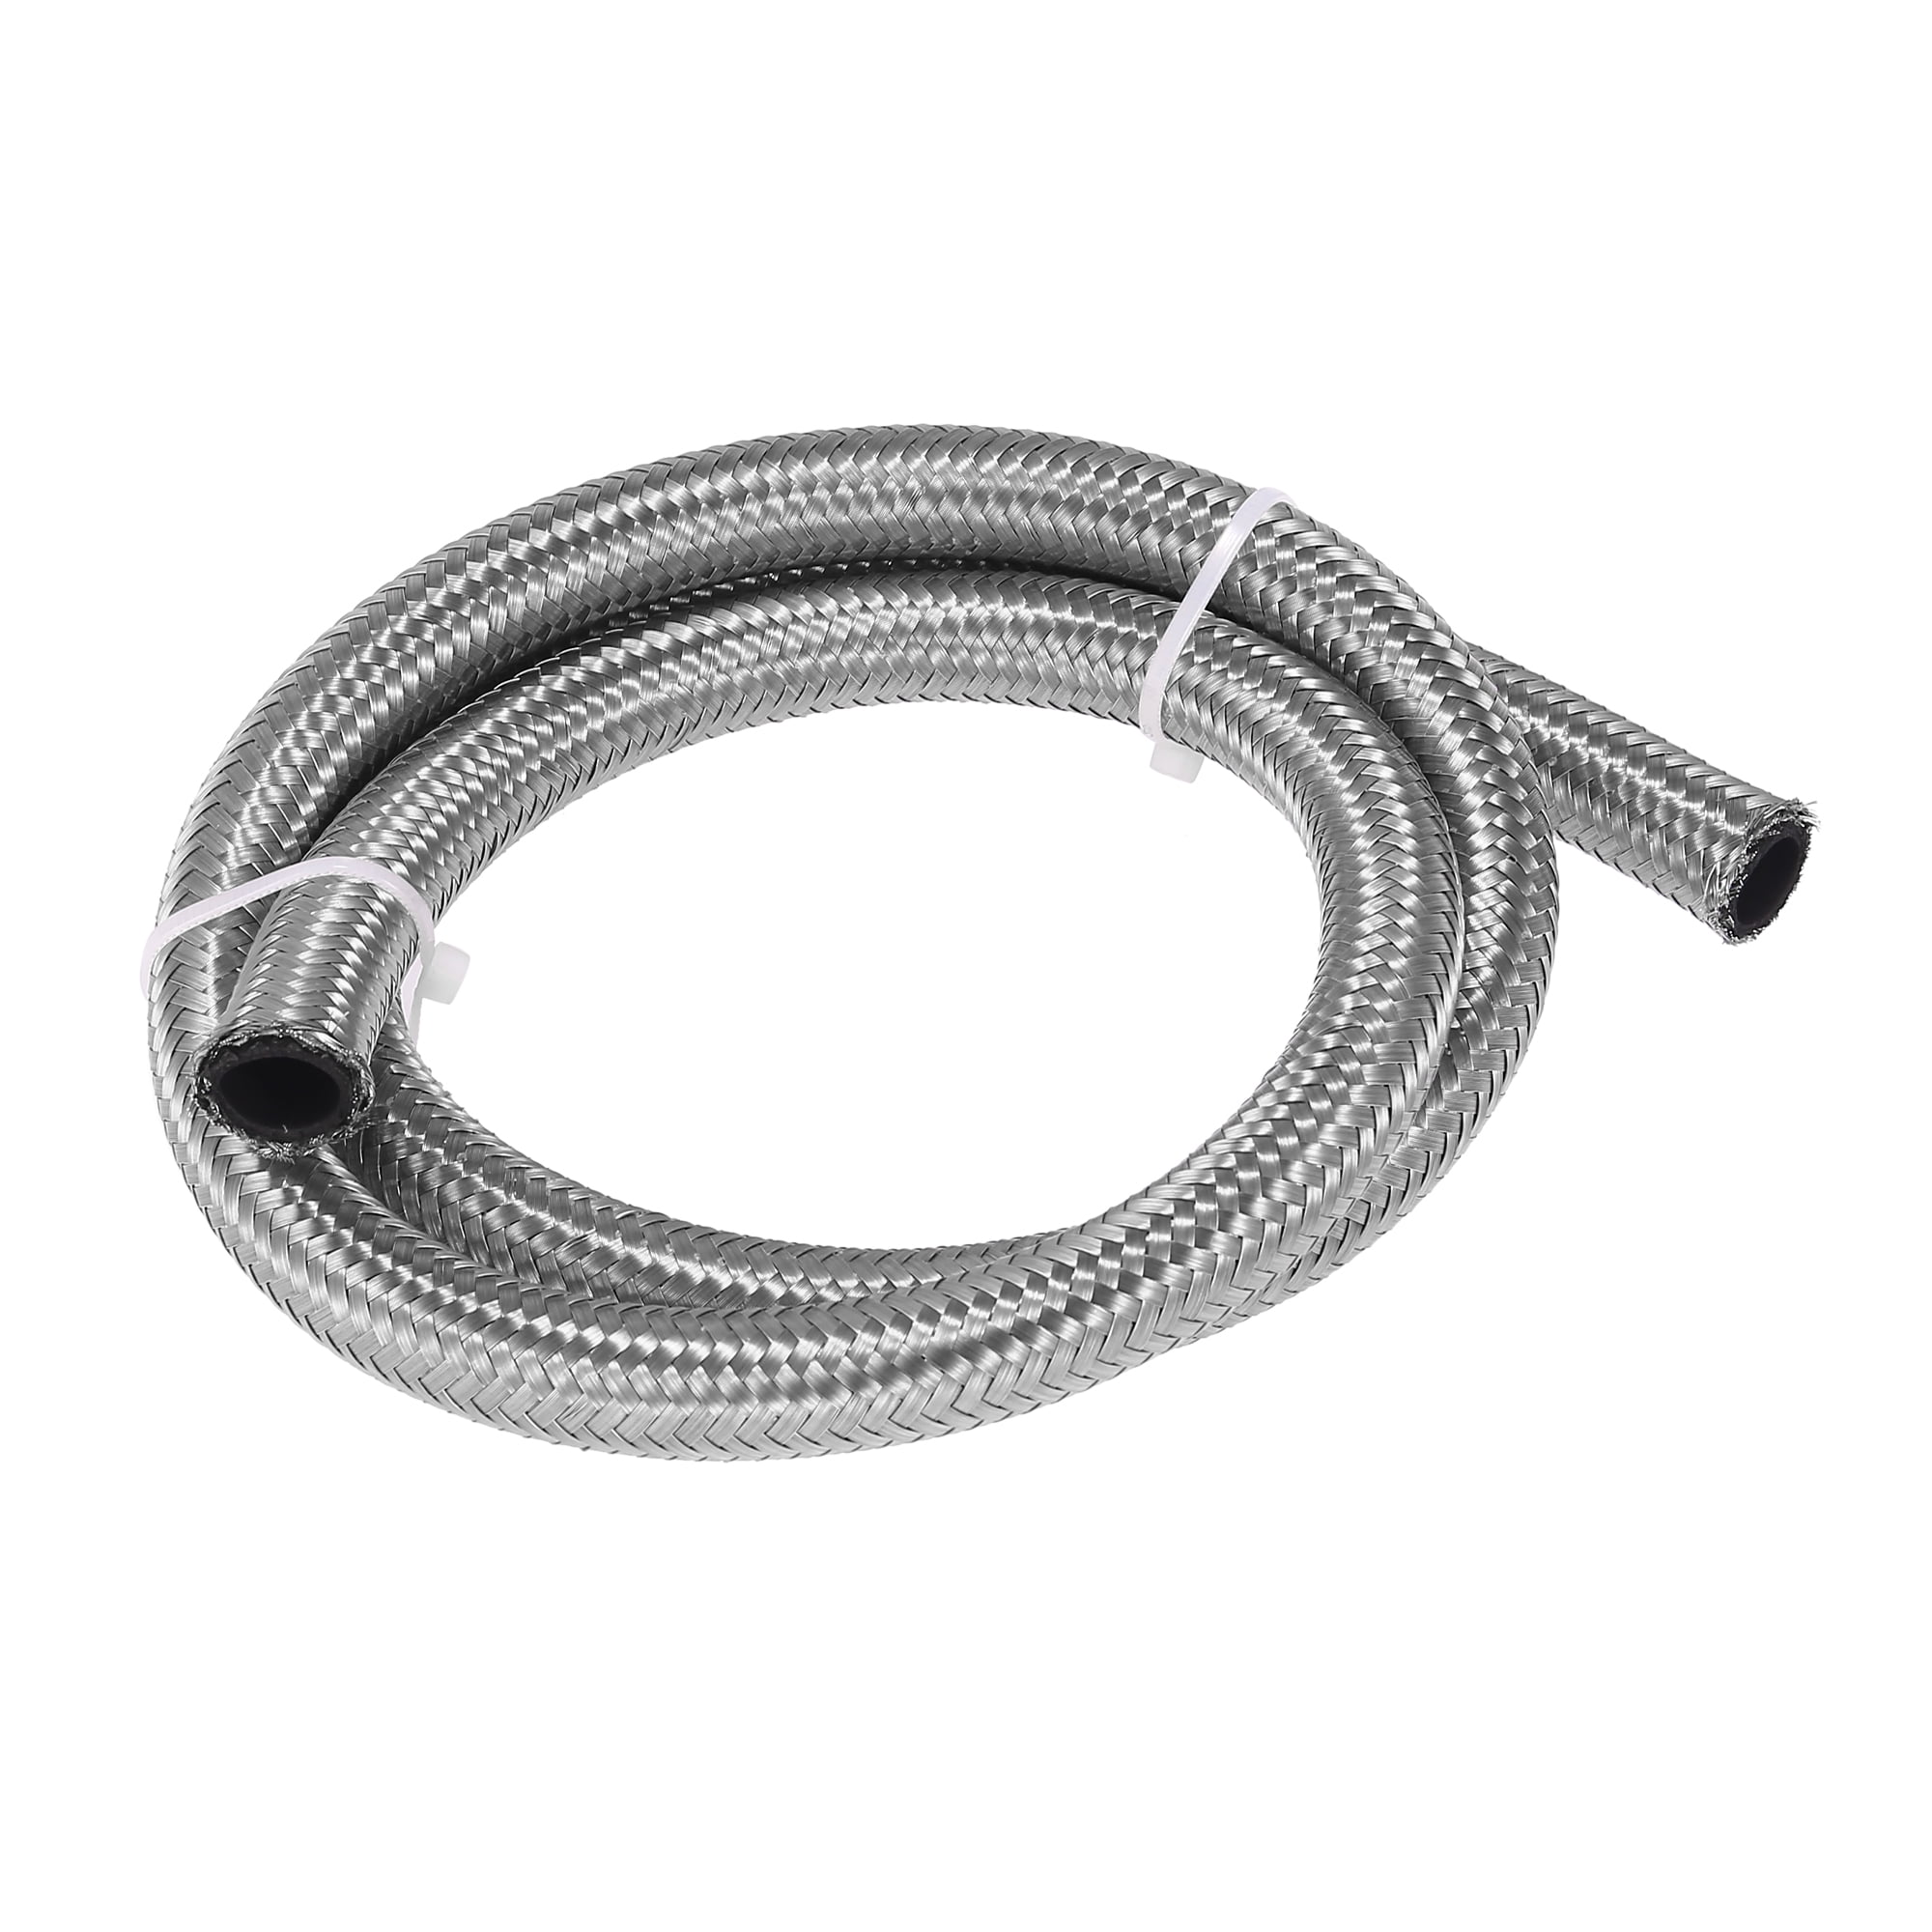 Car Stainless Steel Braided Mesh Hose 3.3ft 1/2 AN8 Fuel Hose Oil